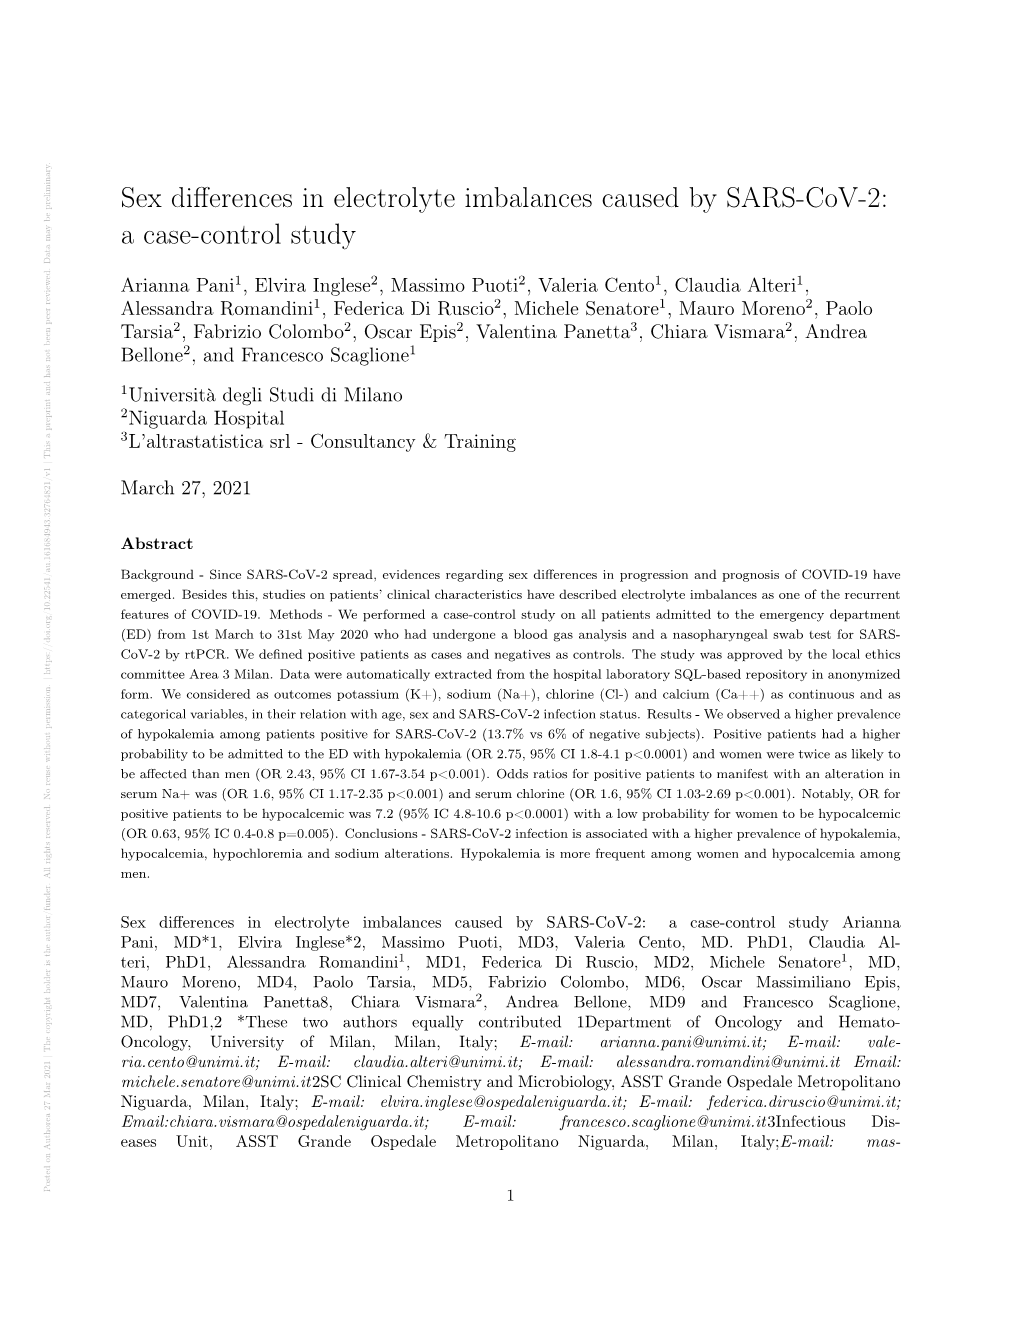 Sex Differences in Electrolyte Imbalances Caused by SARS-Cov-2